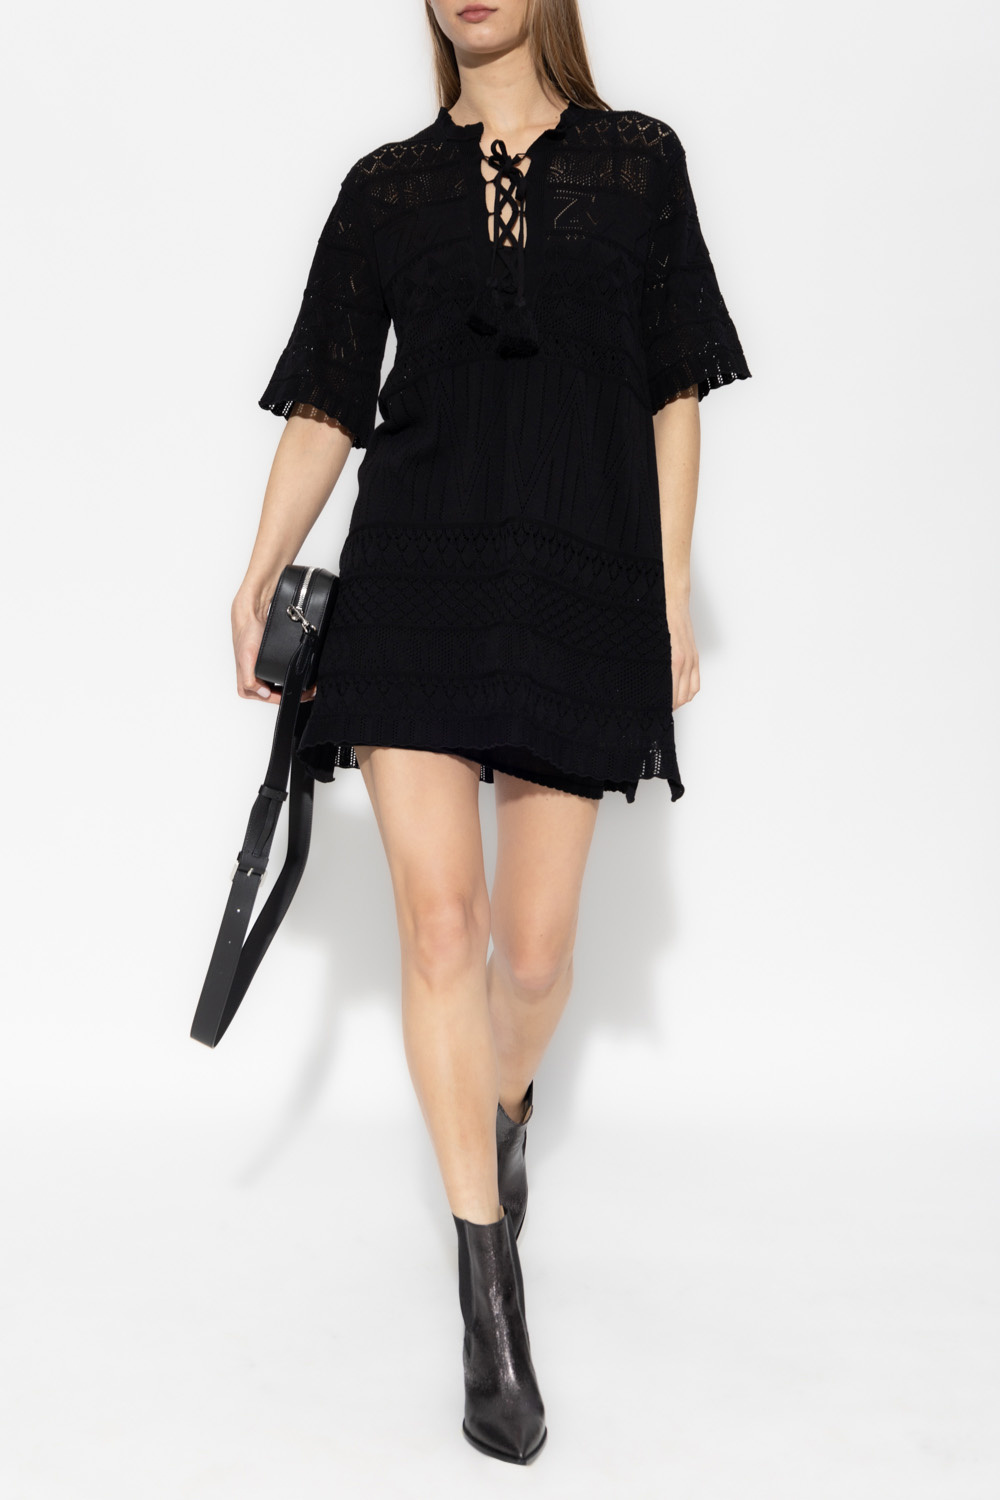 Zadig & Voltaire ‘Thoe’ two-layered dress